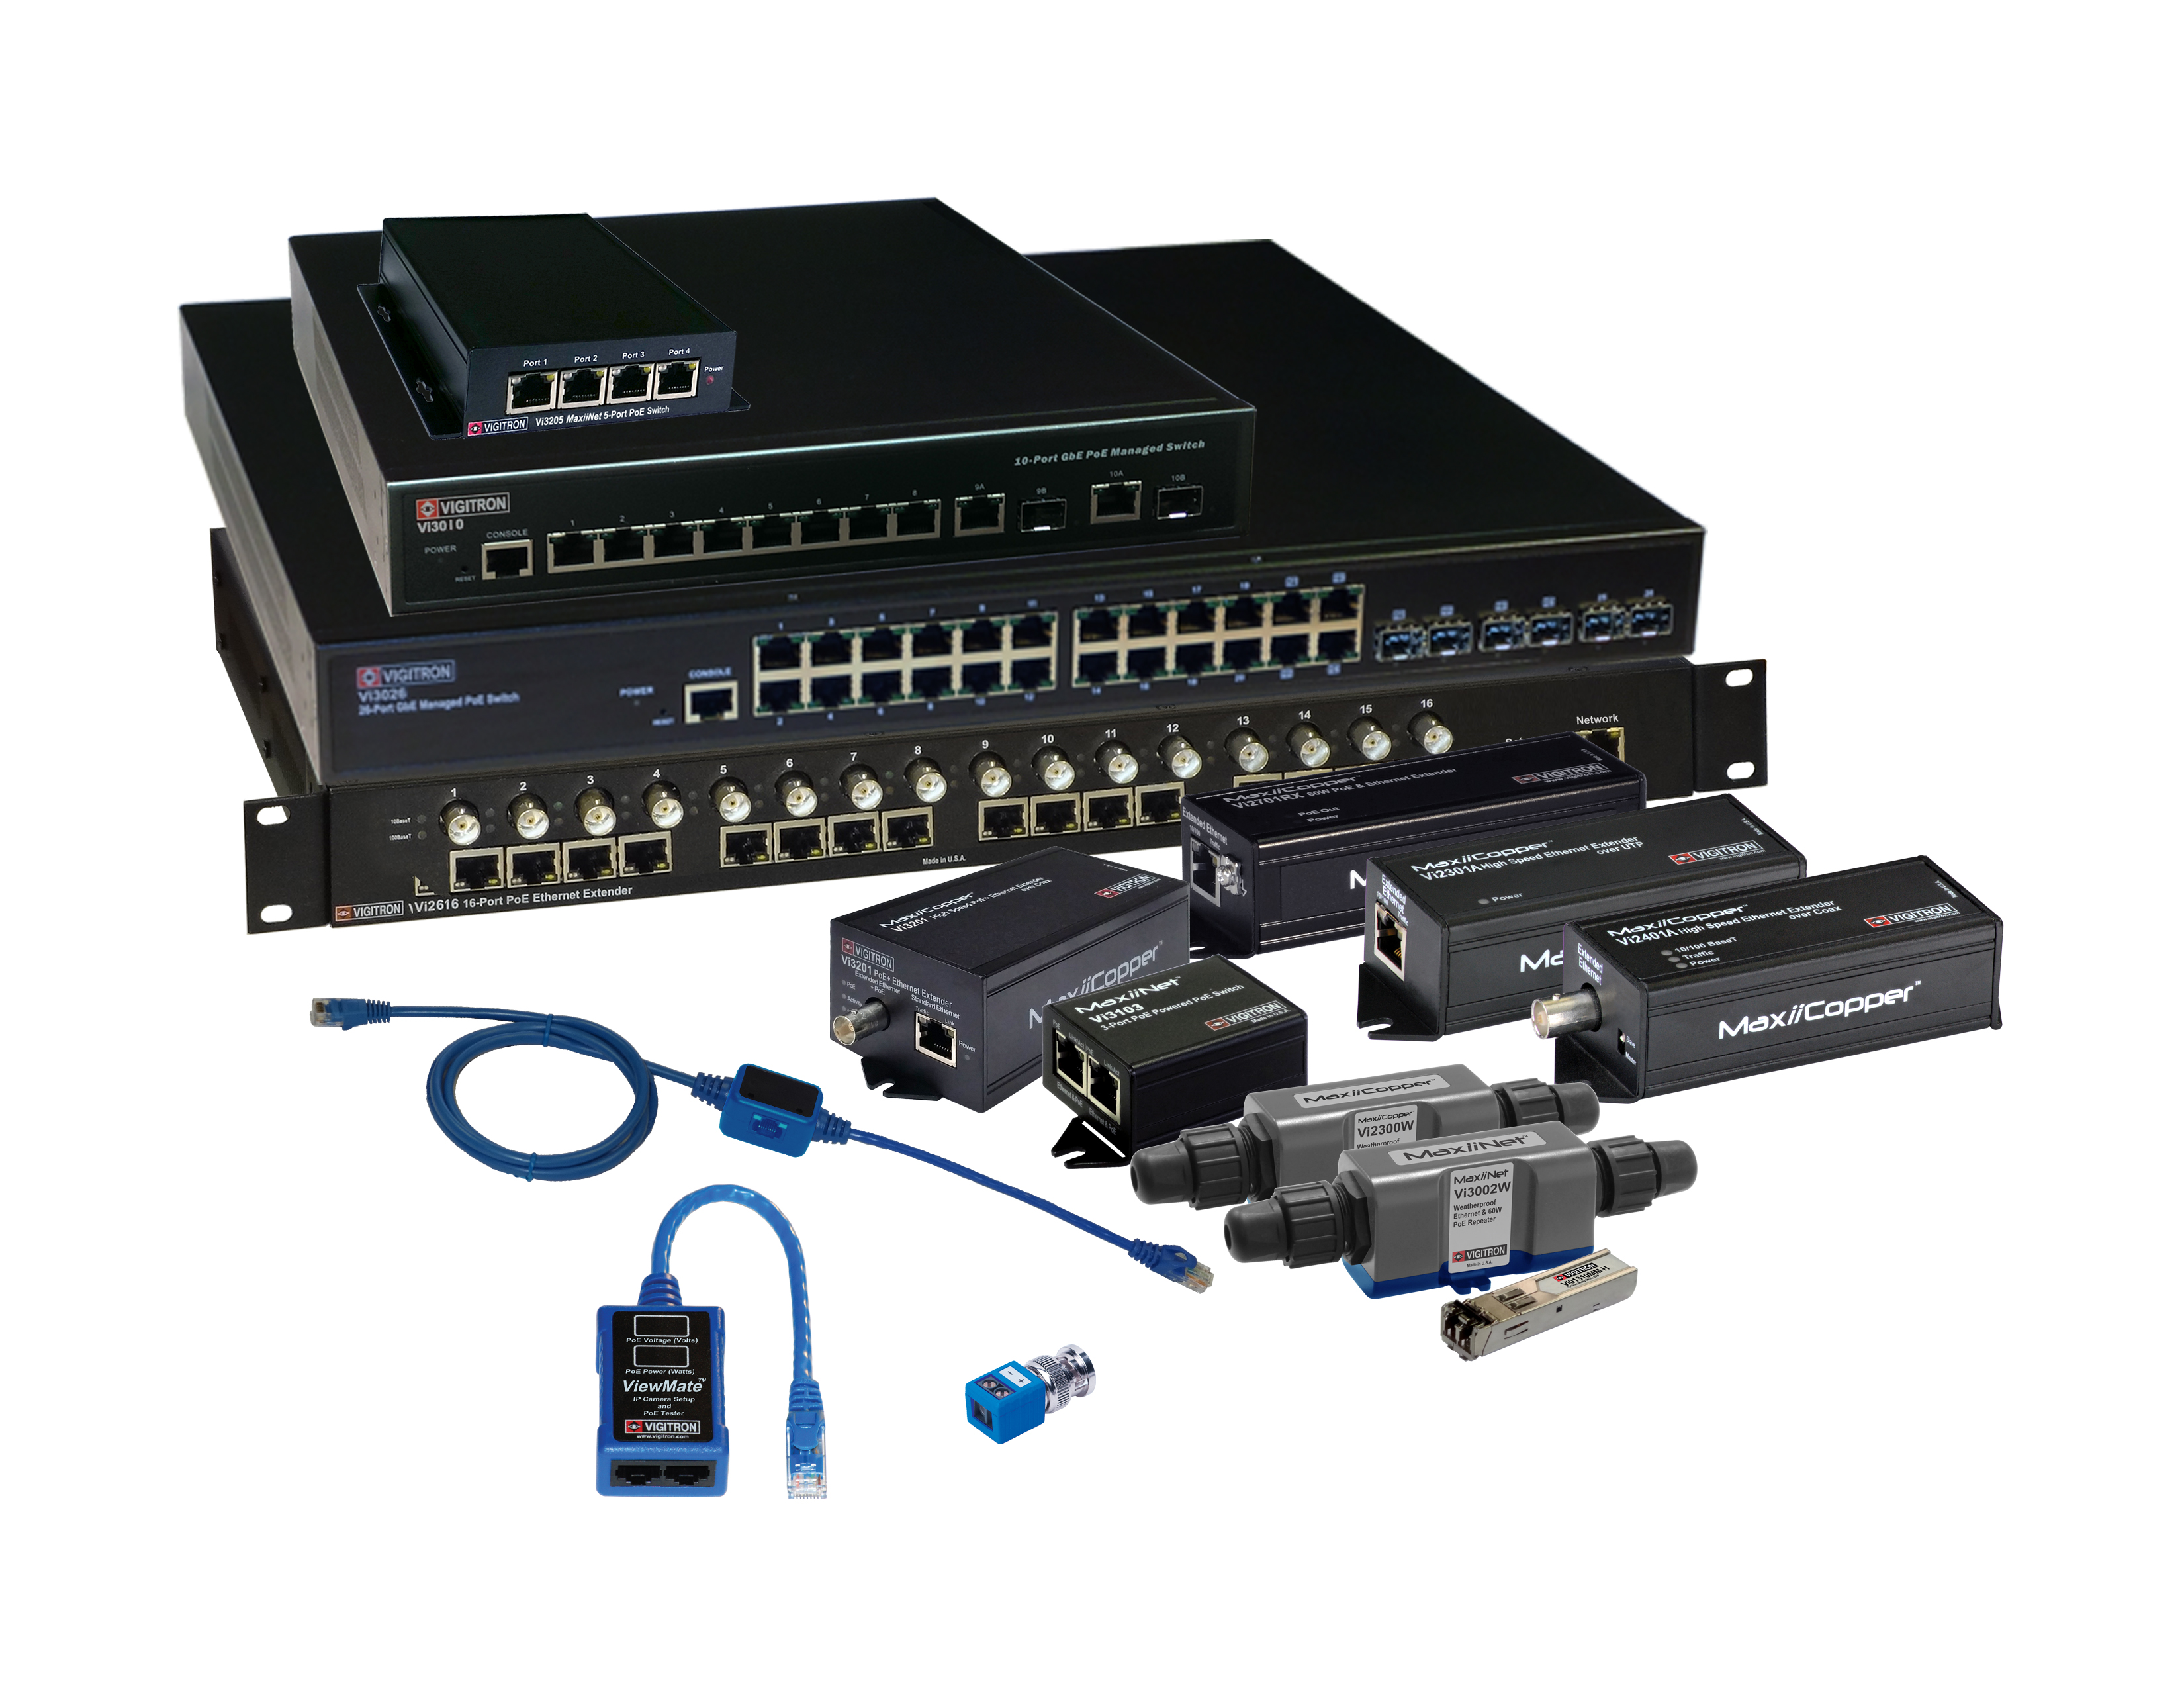 Power Over Ethernet POE + Plus Switches 